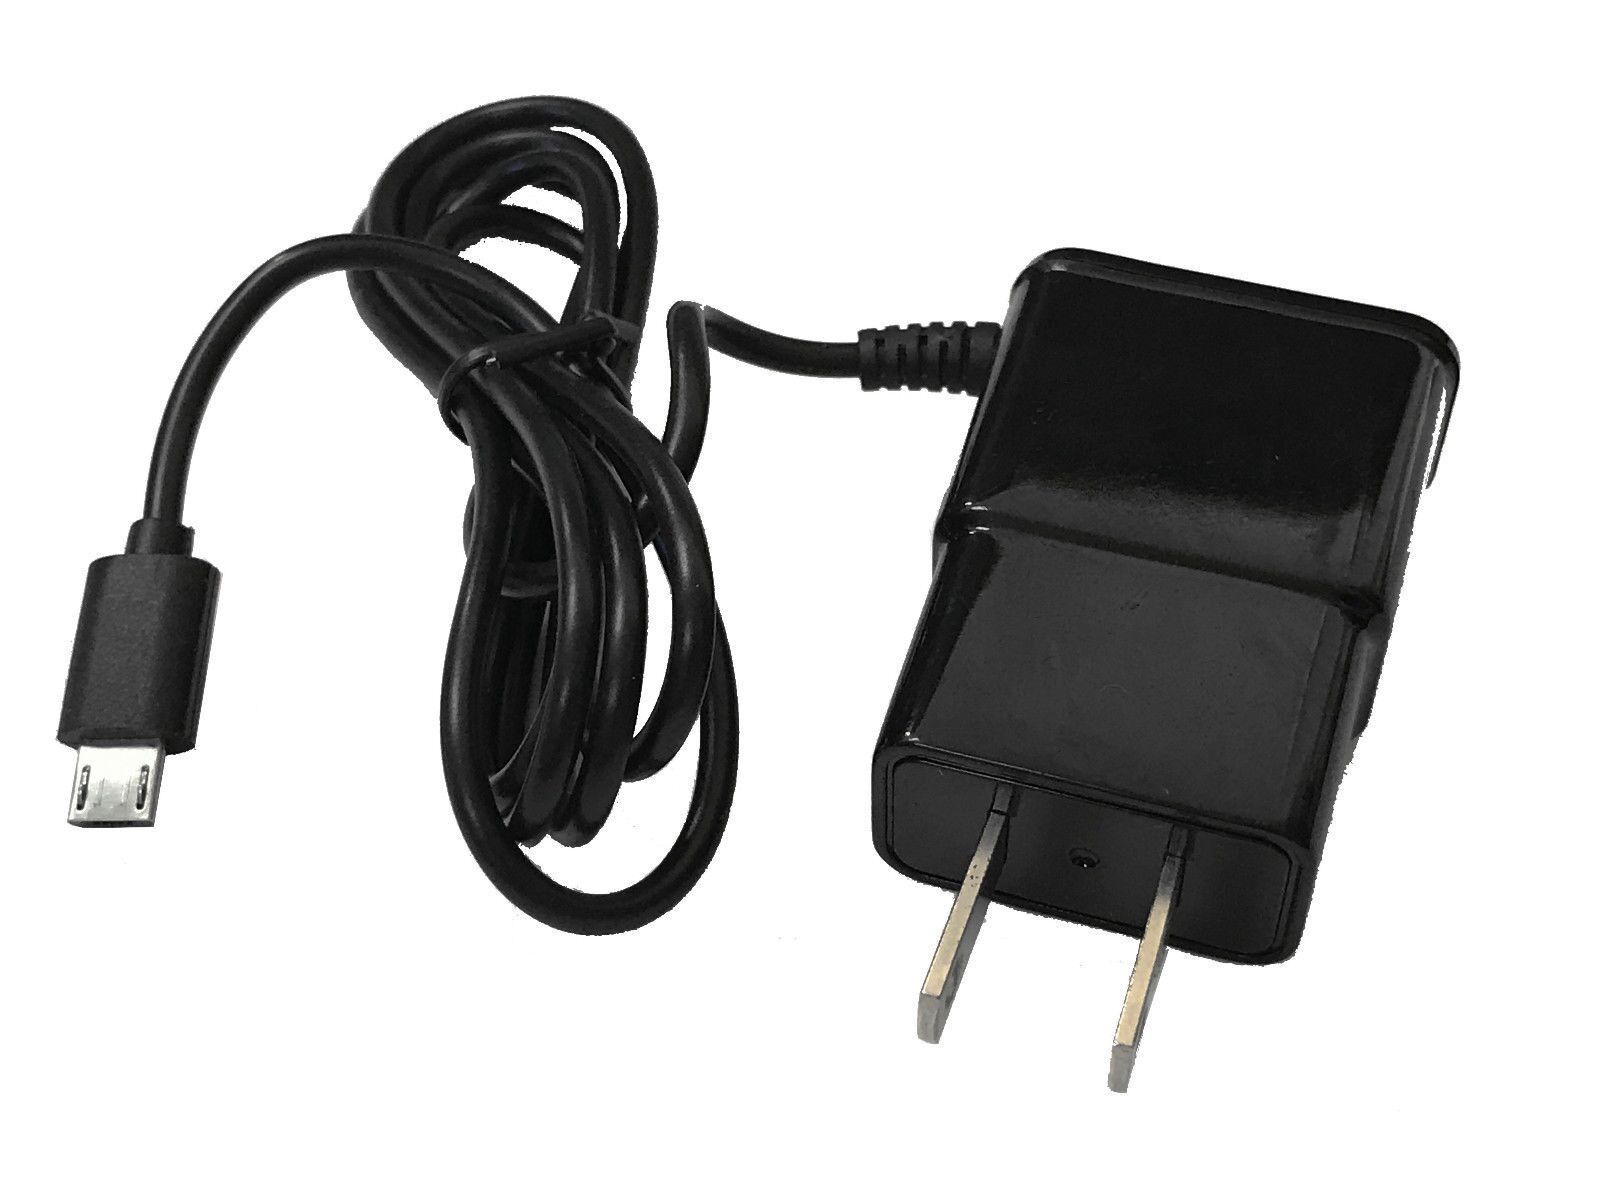 2 AMP Wall Home Travel Charger for Samsung Galaxy Sol J3 J3V SM-J3109 Amp Prime - $18.99